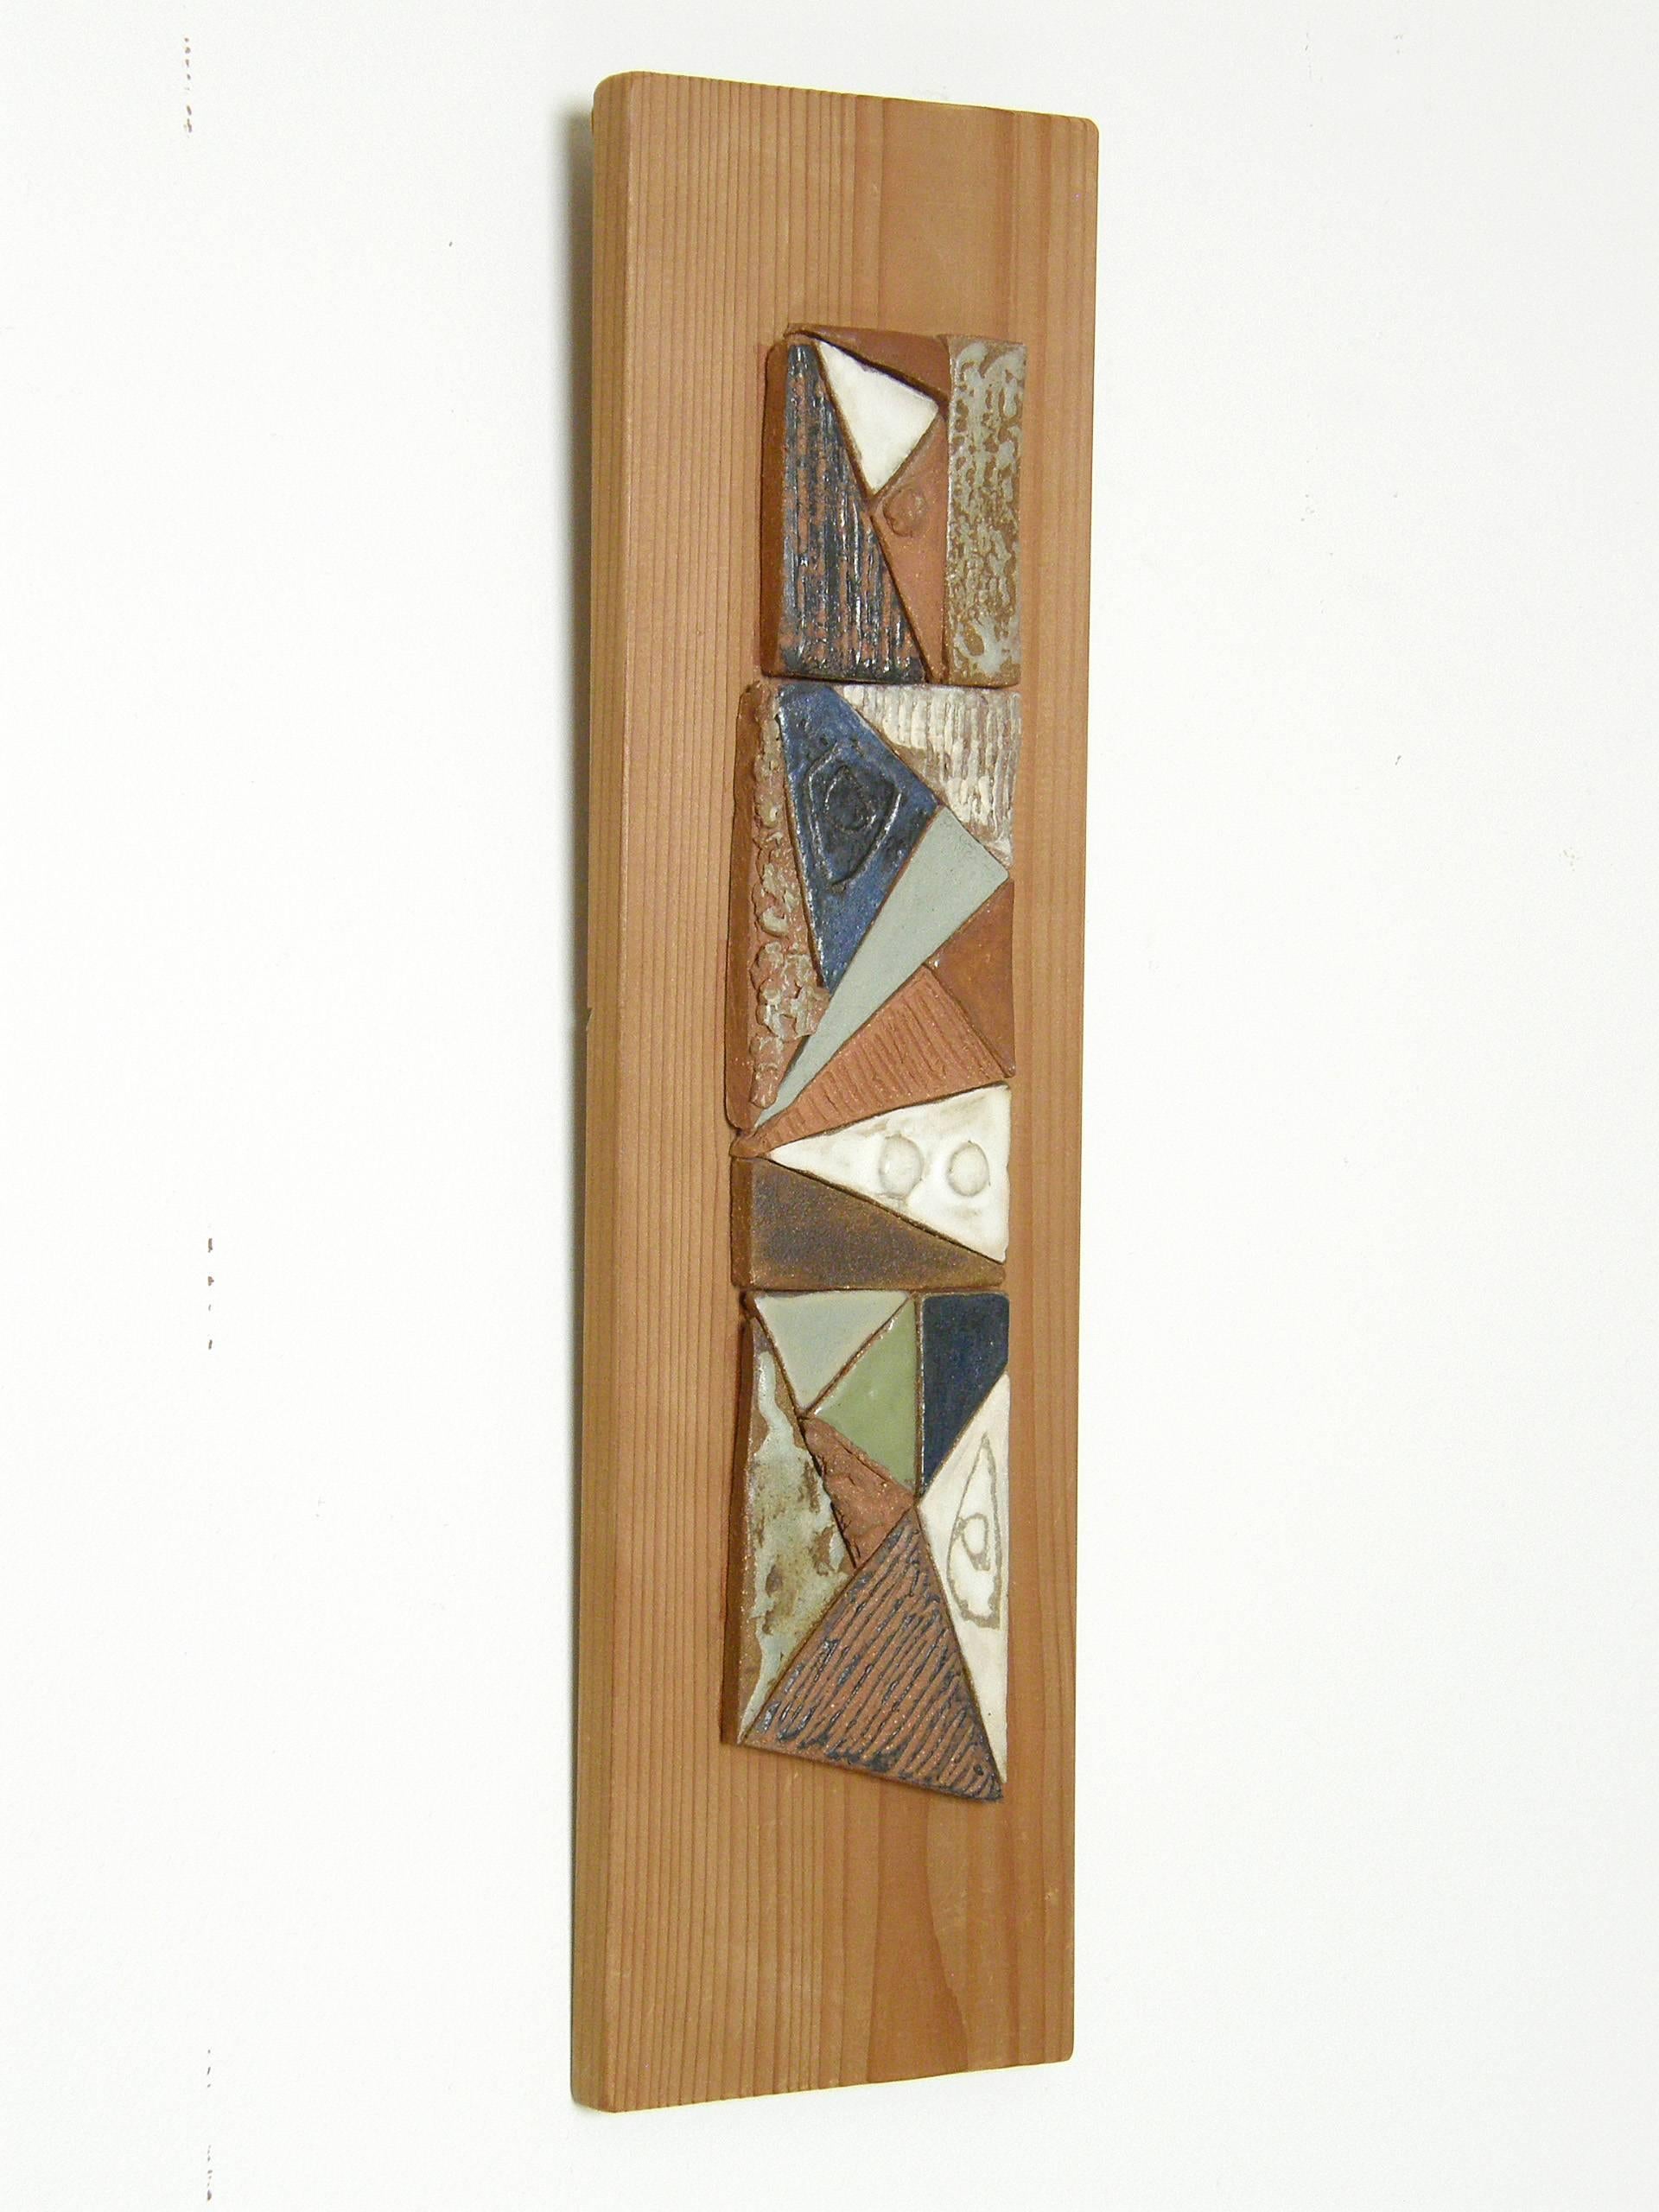 Abstract mosaic wall sculpture mounted on board by Illinois ceramic artist Peg Tootelian. The various textures and glazes create a kind of 